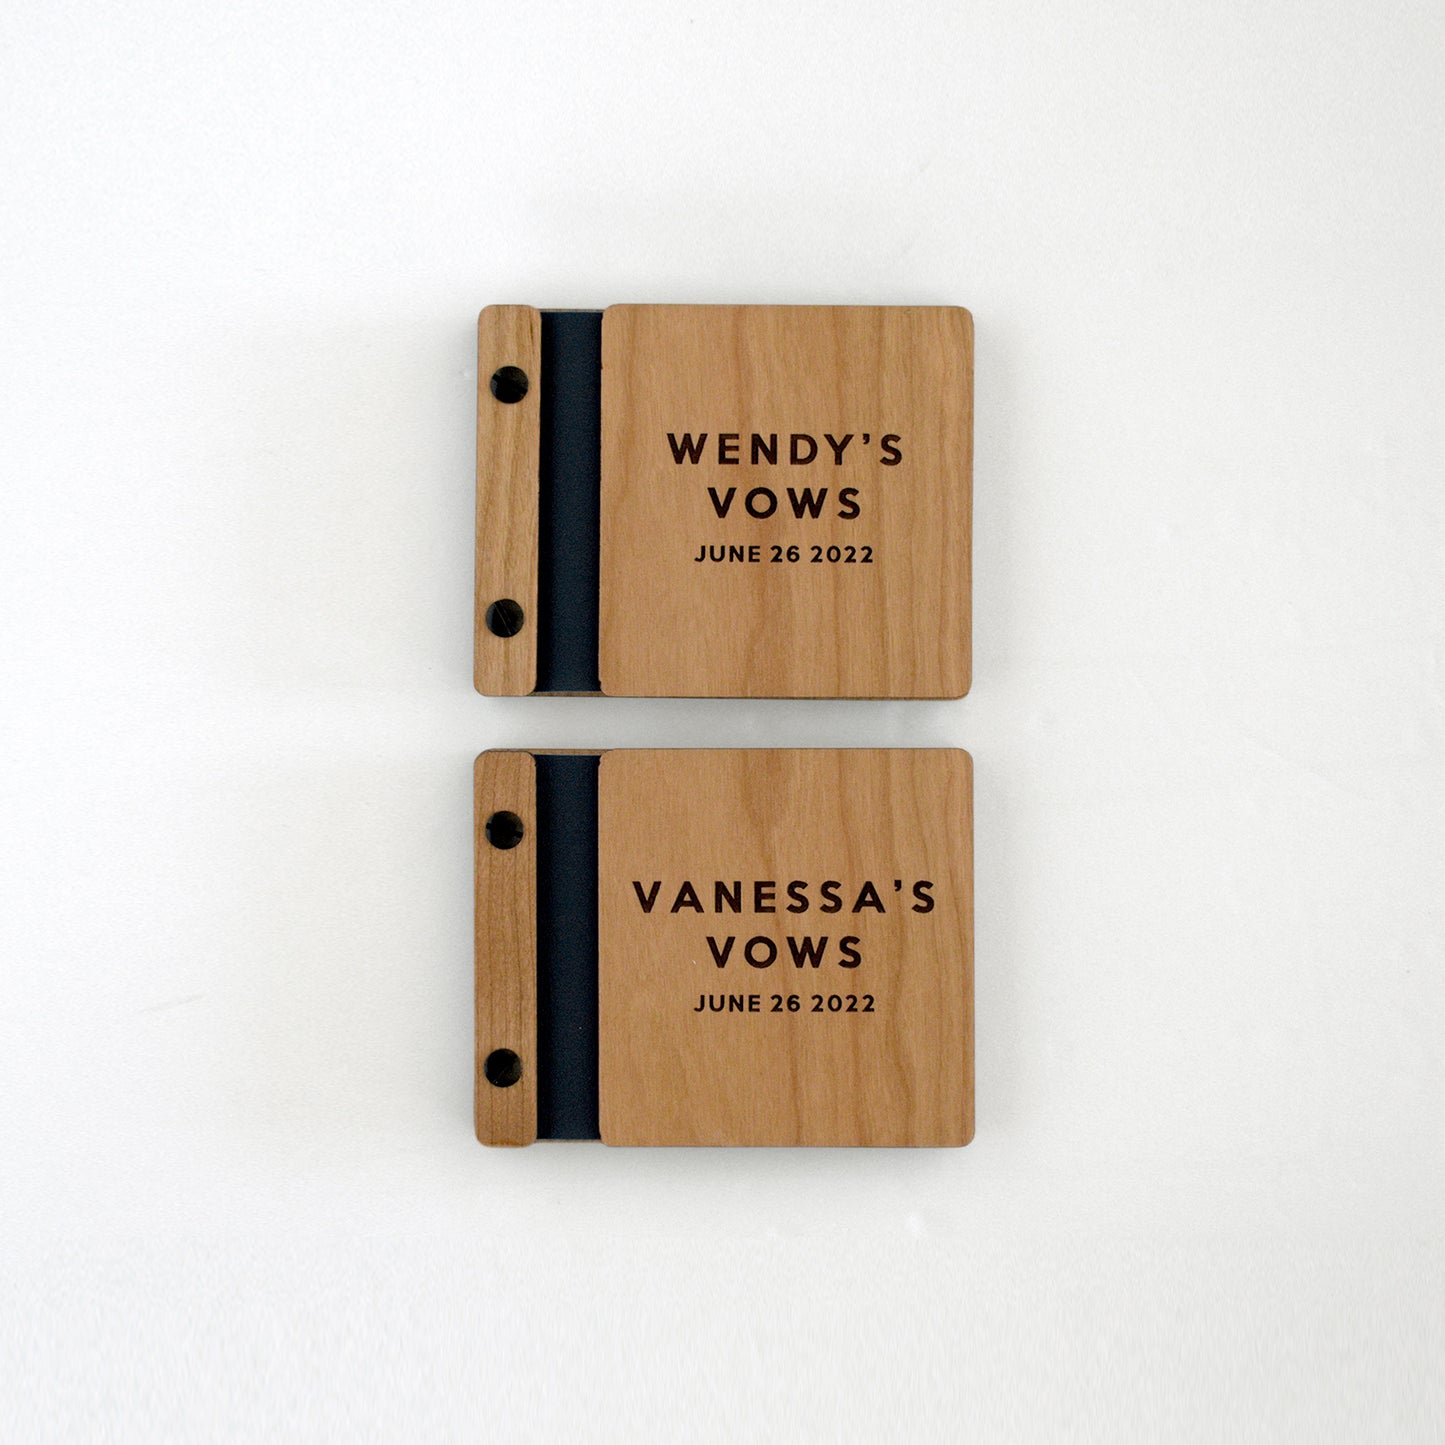 Two vow books sit on a table next to one another. Made of cherry wood, black binding, and black hardware, they read Wendy's Vows, Vanessa's Vows.